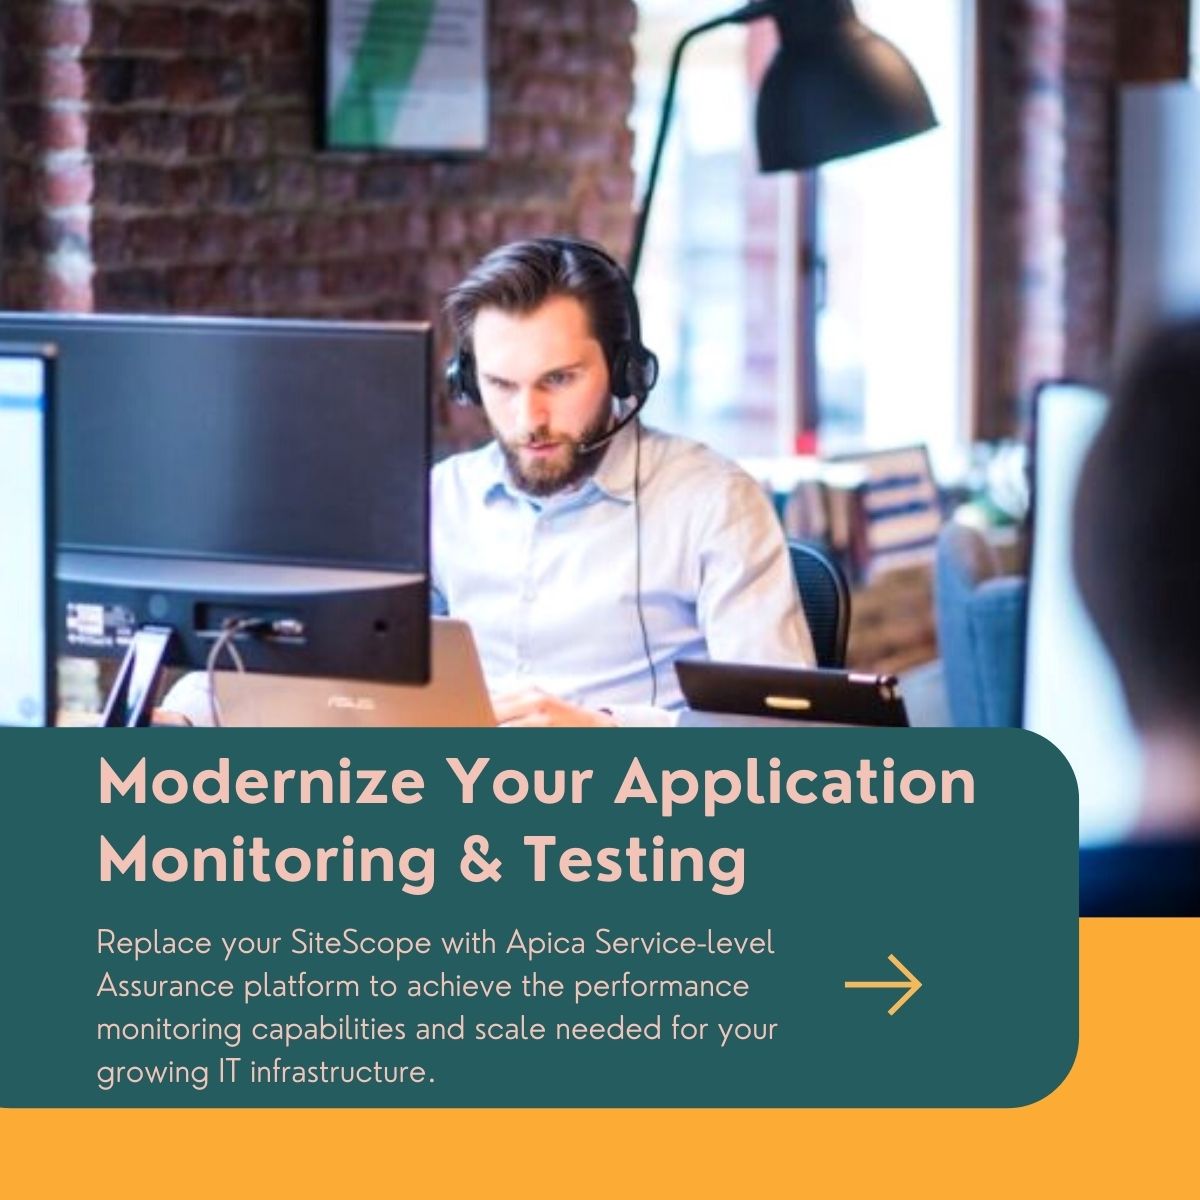 Check out our topic briefs, which can guide you through everything from replacing SiteScope to API monitoring, through Apica's uniquely powerful active #Monitoring platform. https://t.co/FfVnR6GS7N https://t.co/366QgfDlQW